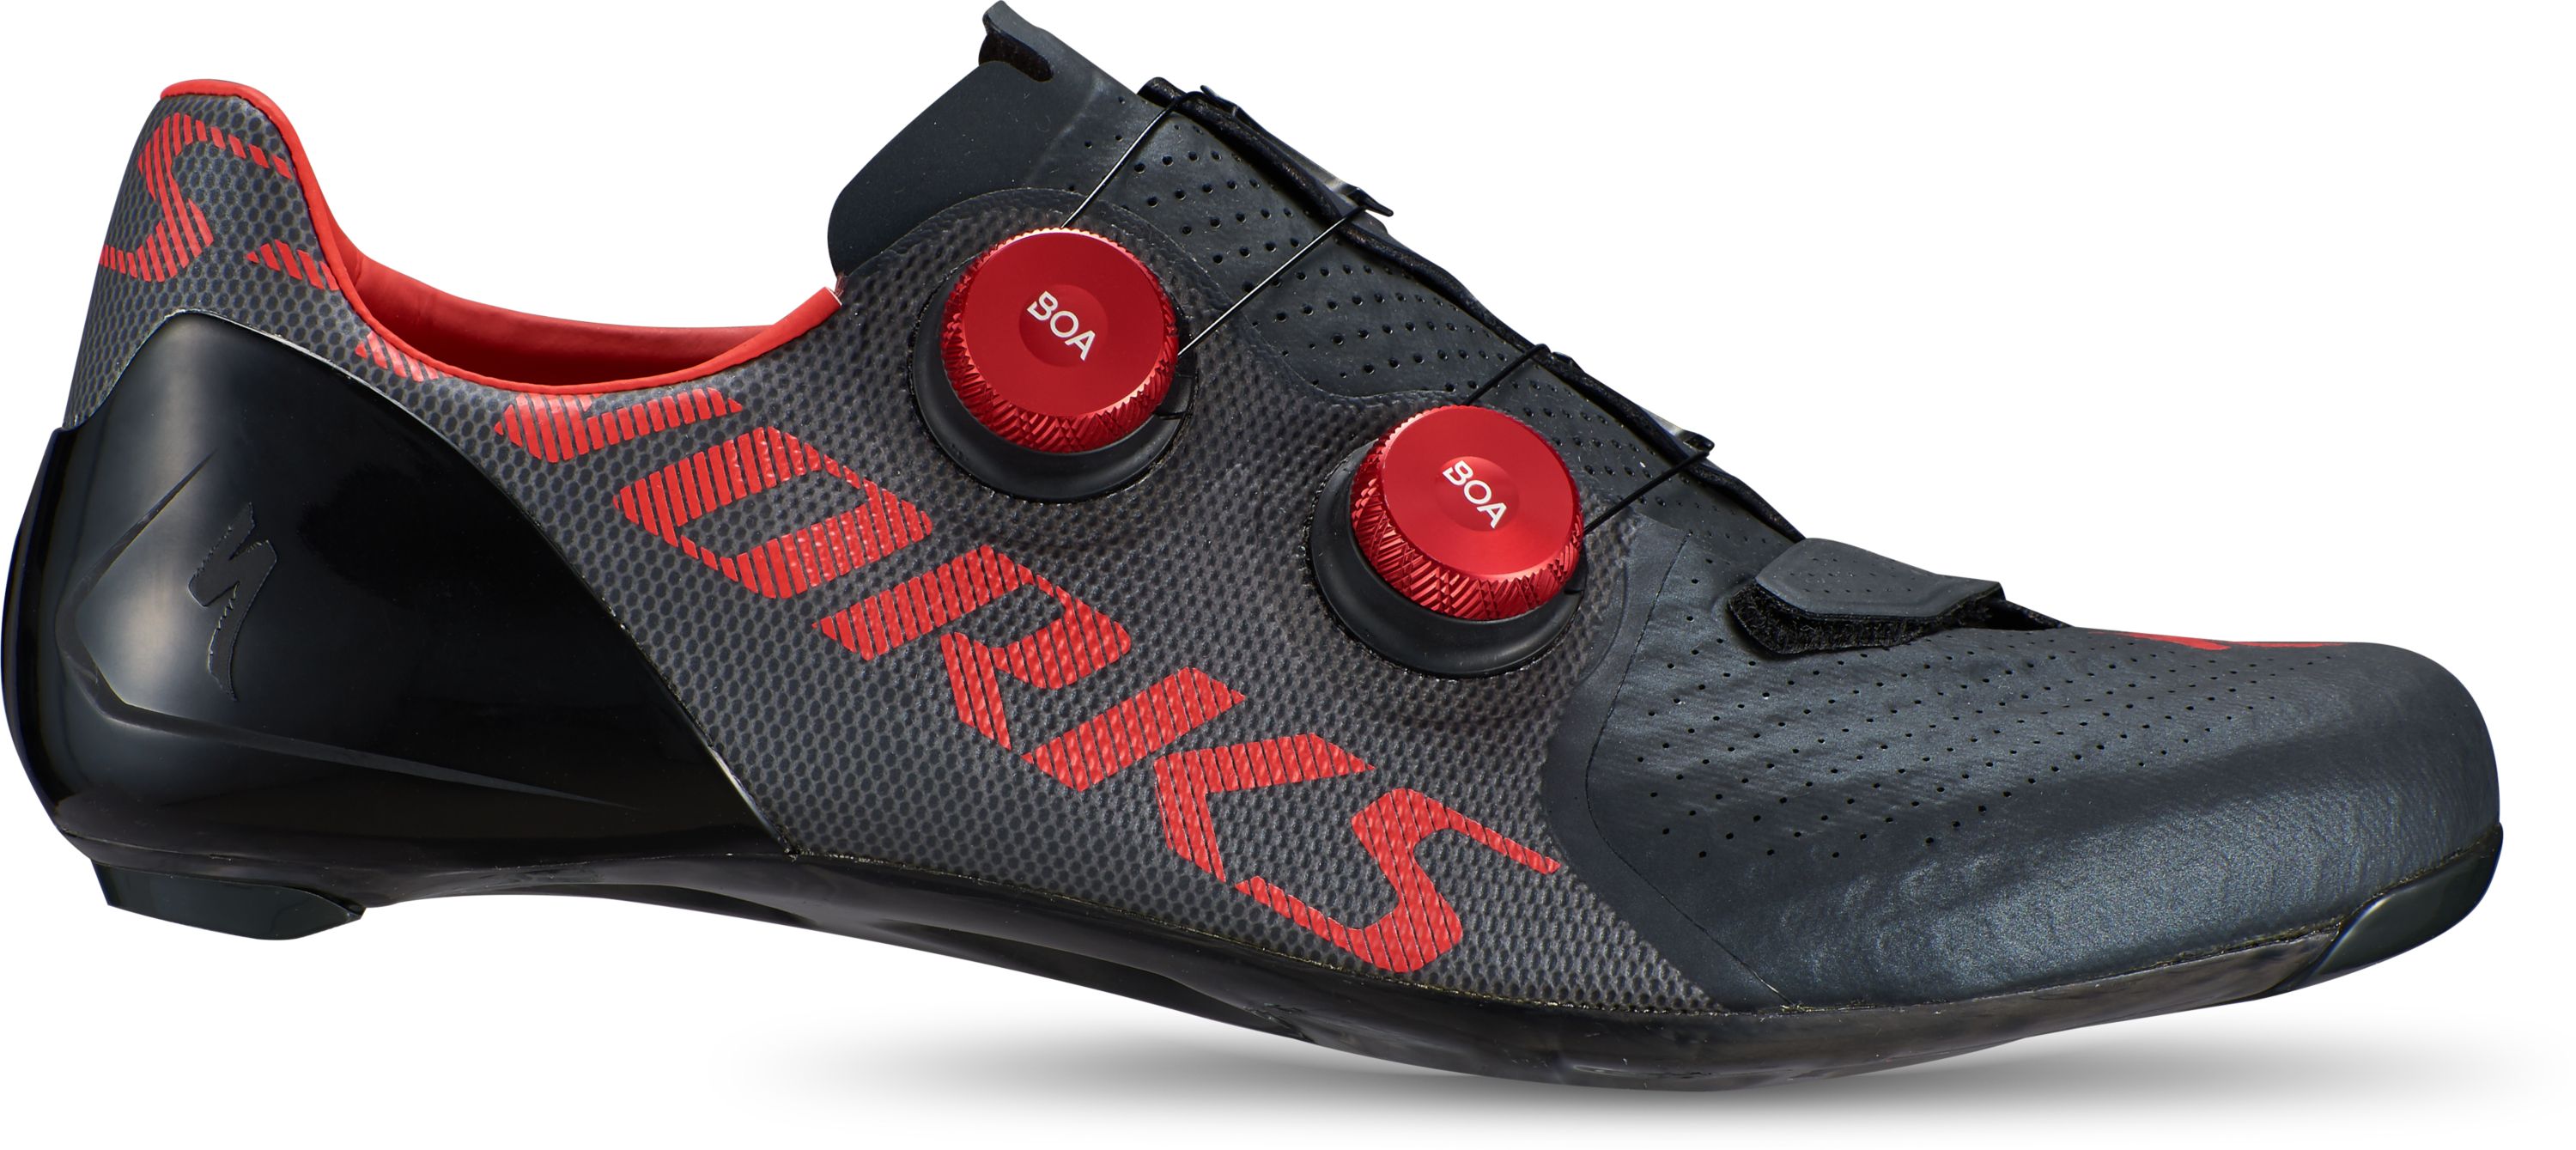 Specialized S-WORKS 7 Road Shoes Black 